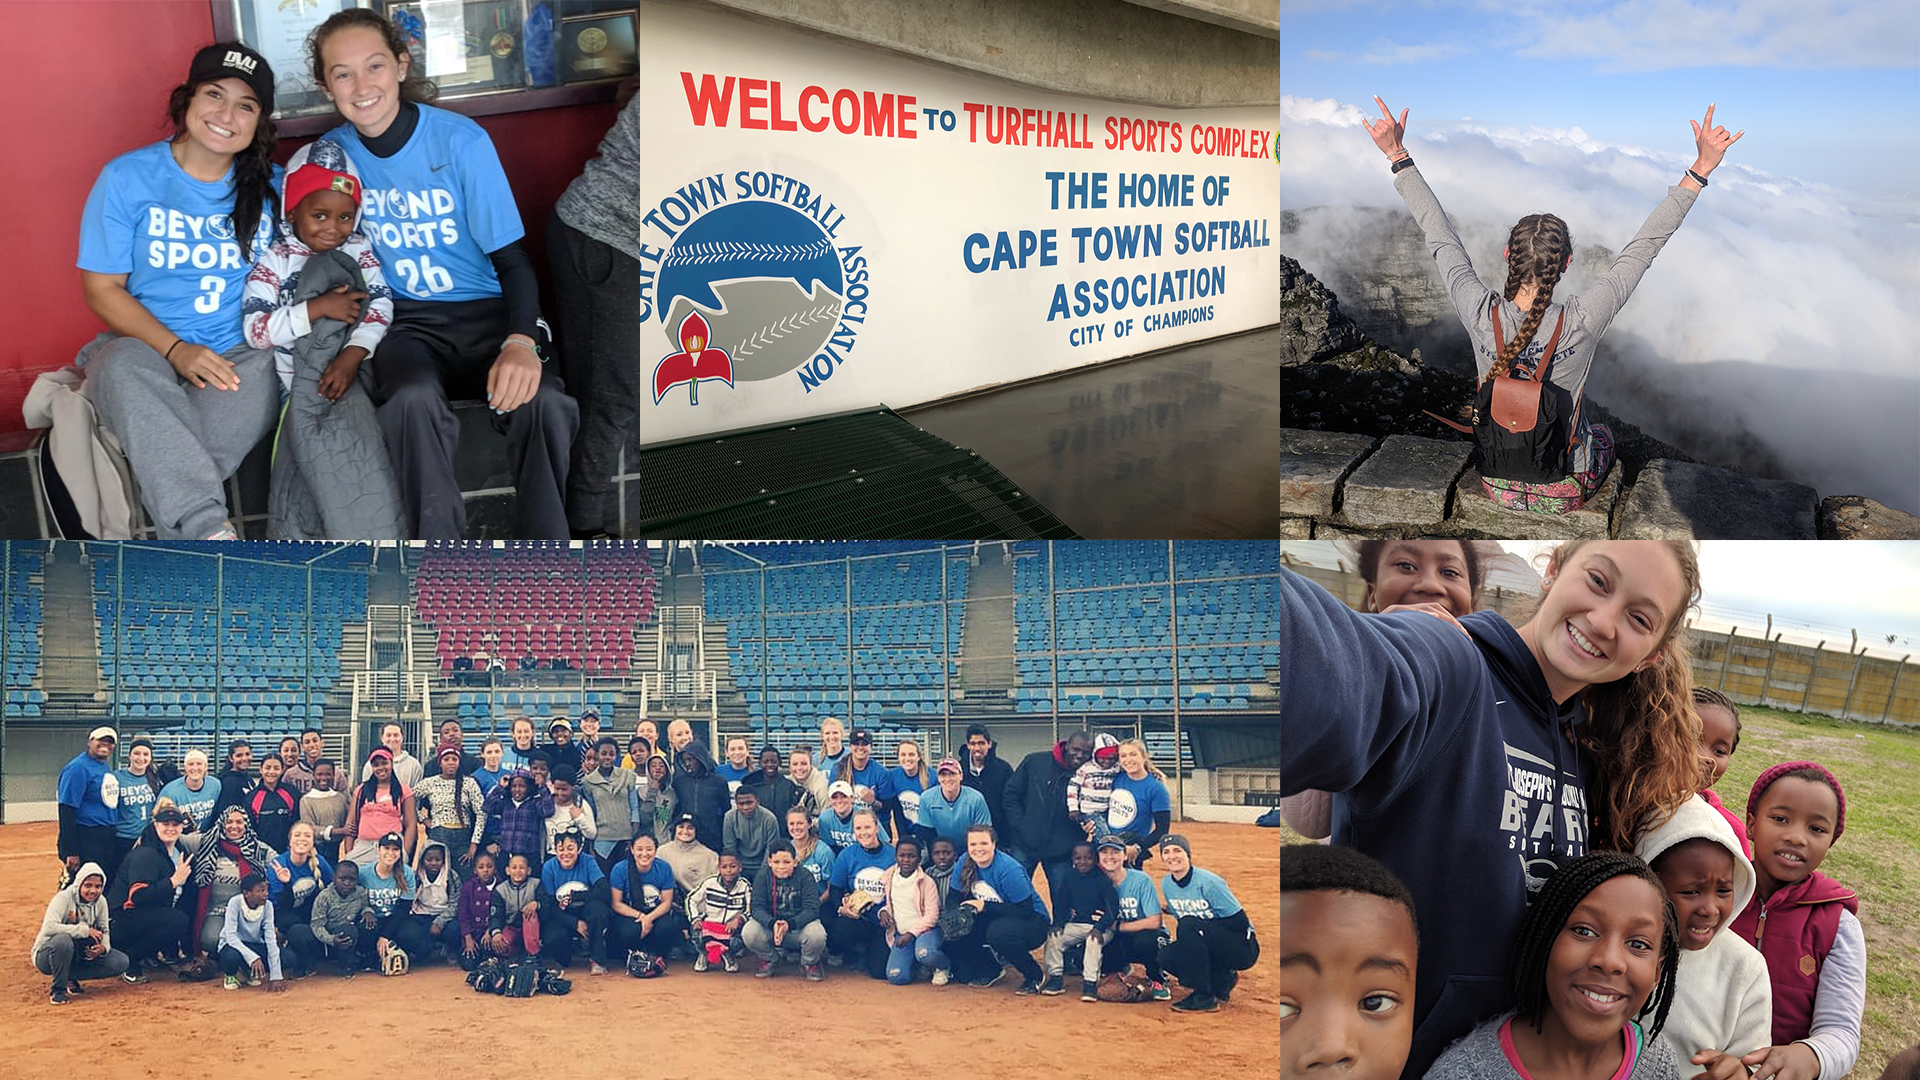 Bears Summer Stories: Mahoney Spreads Softball to Youth of South Africa With Unforgettable Trip